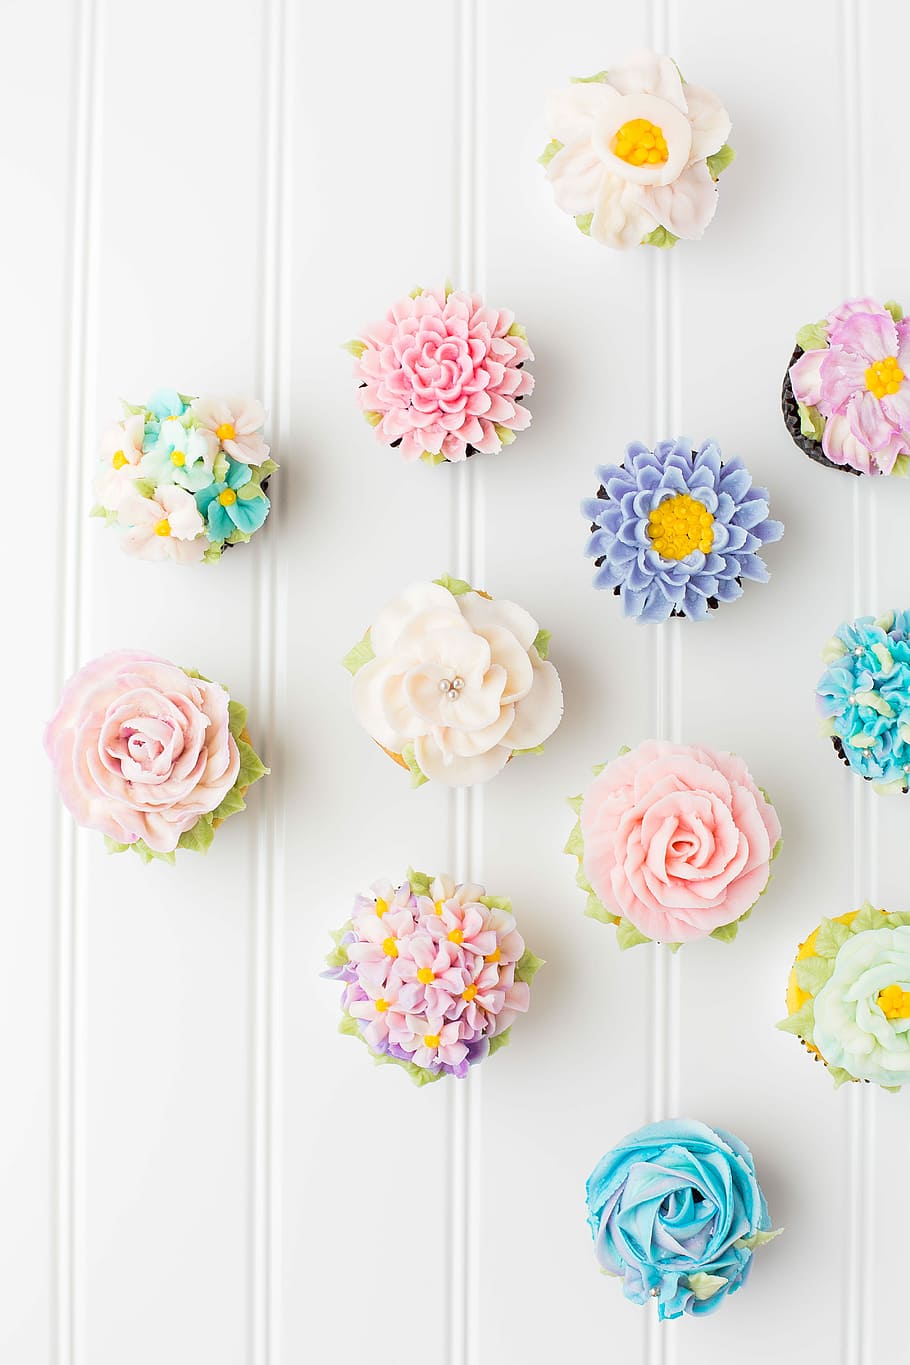 HD wallpaper: flower cupcakes on white surface, top view photography of assorted flower cupcakes